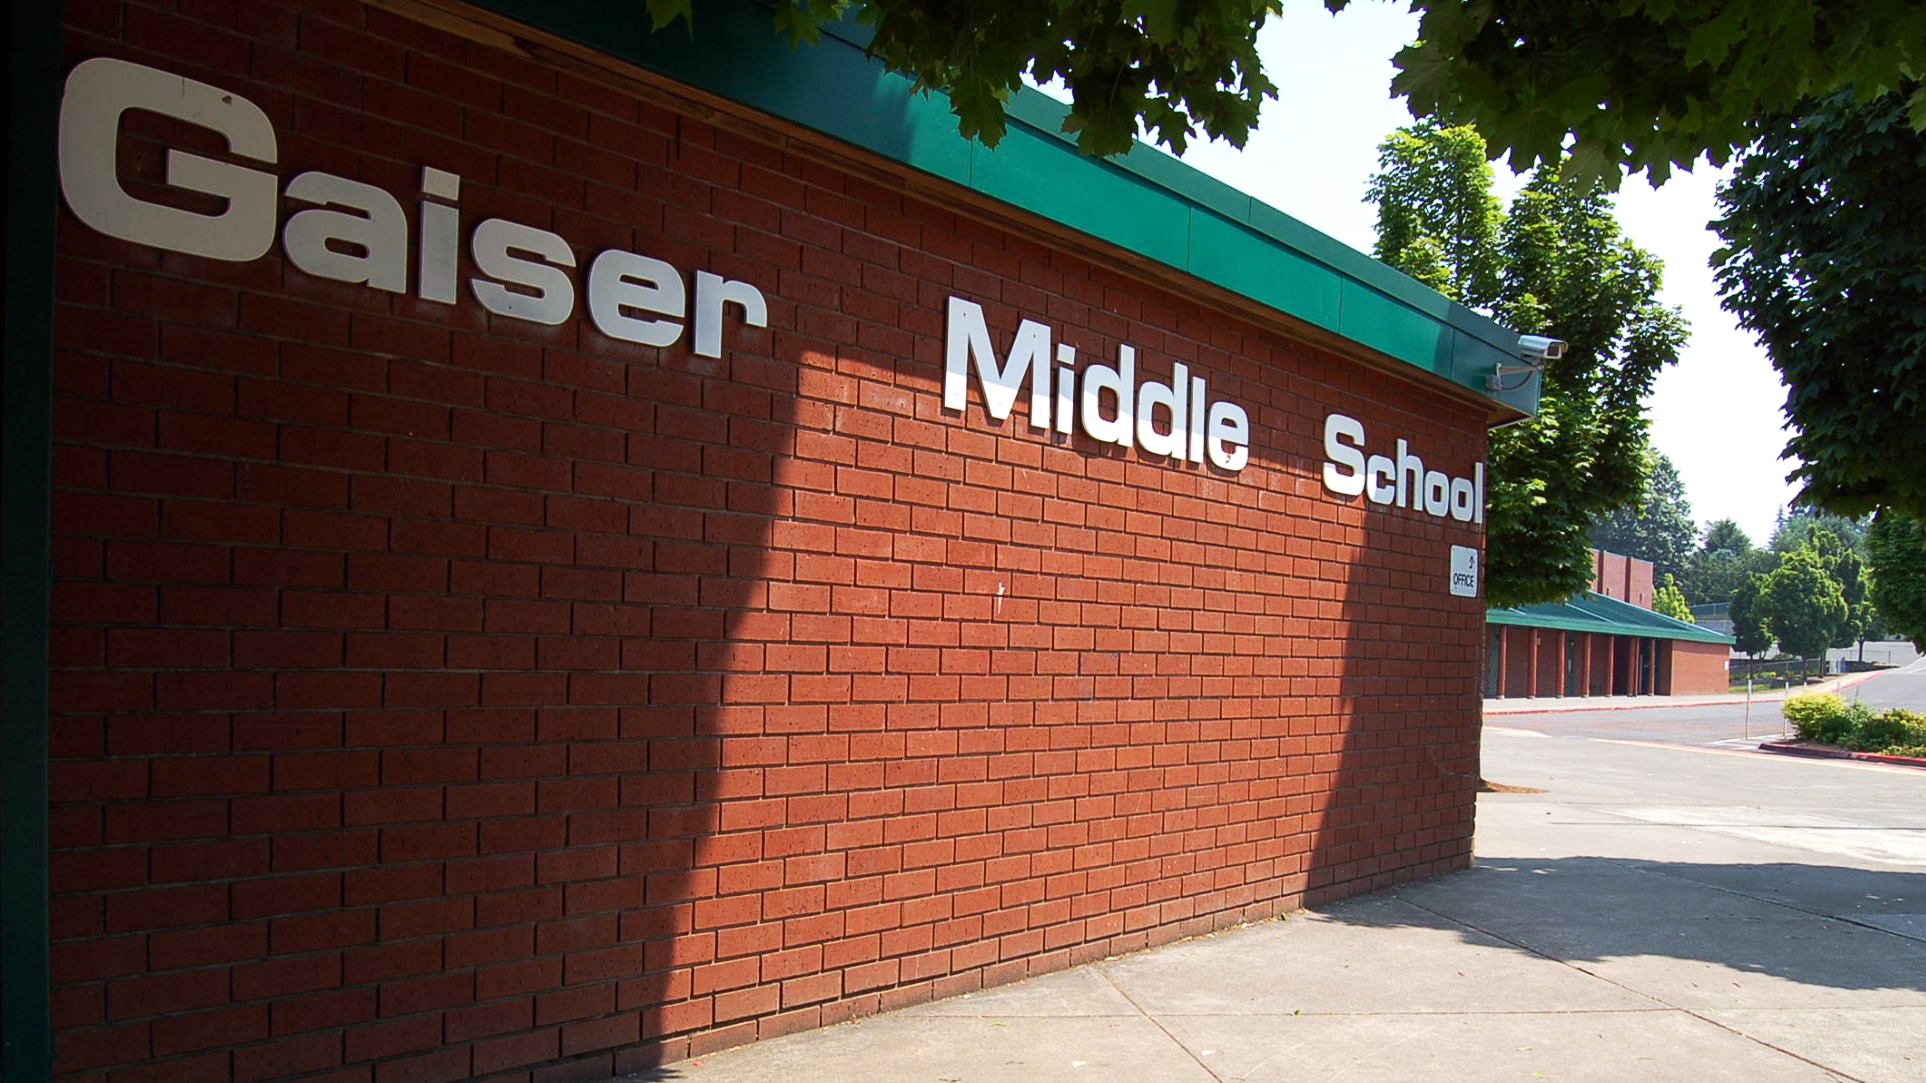 Gaiser Middle School in Vancouver.